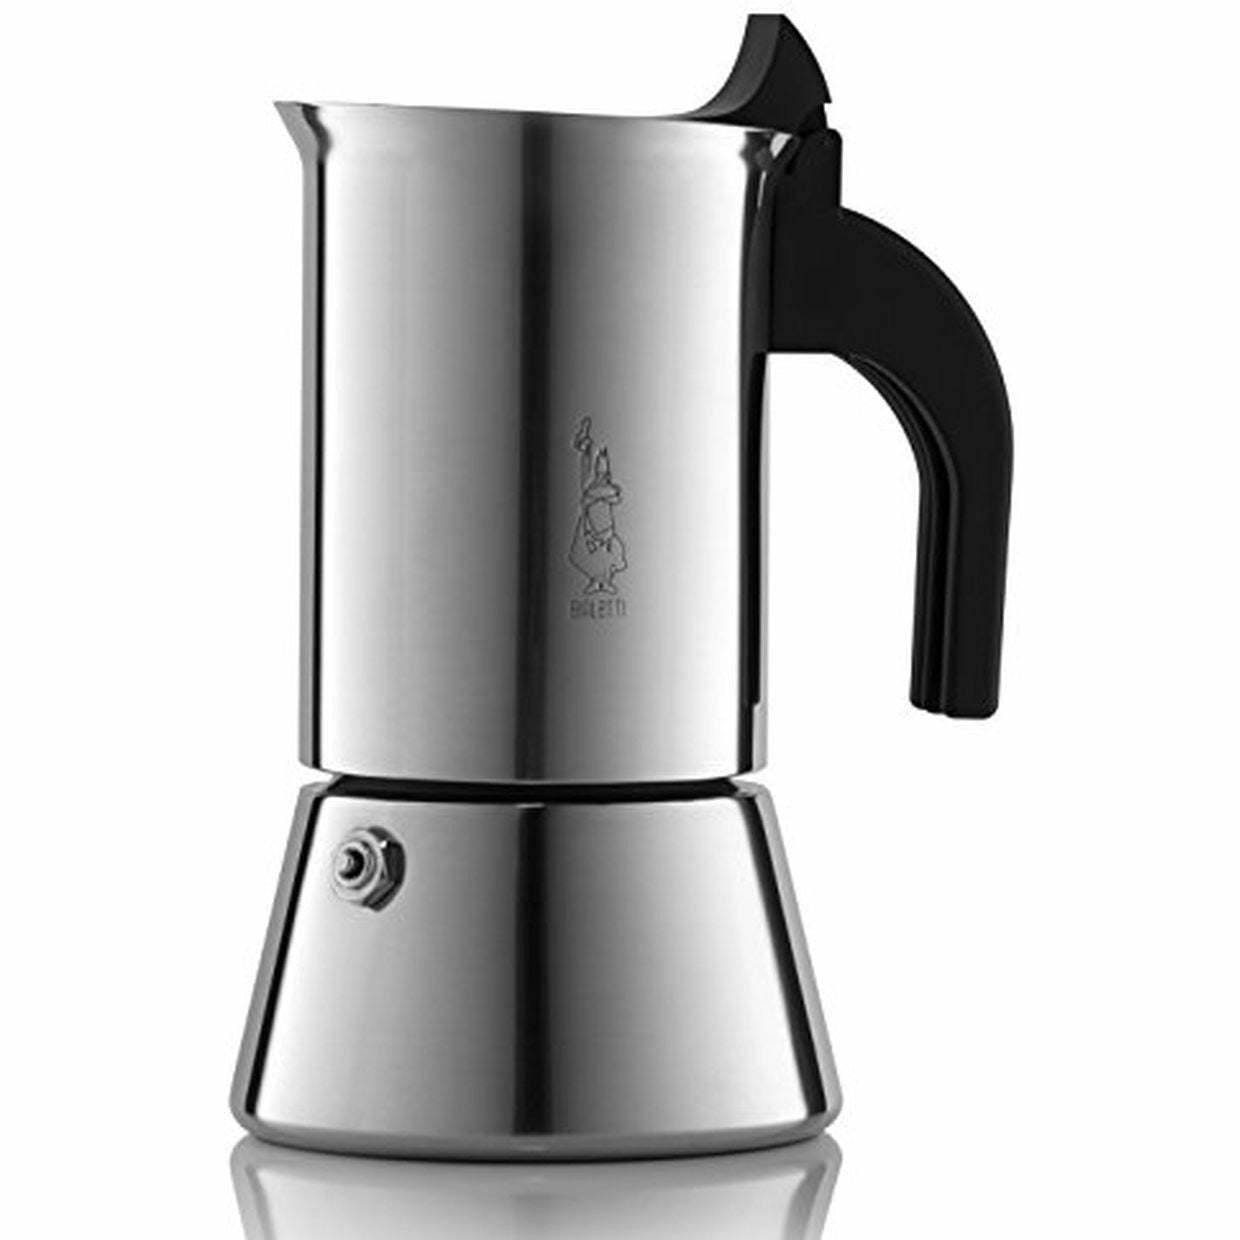 Bialetti Kitty Induction espresso maker, 6 cups